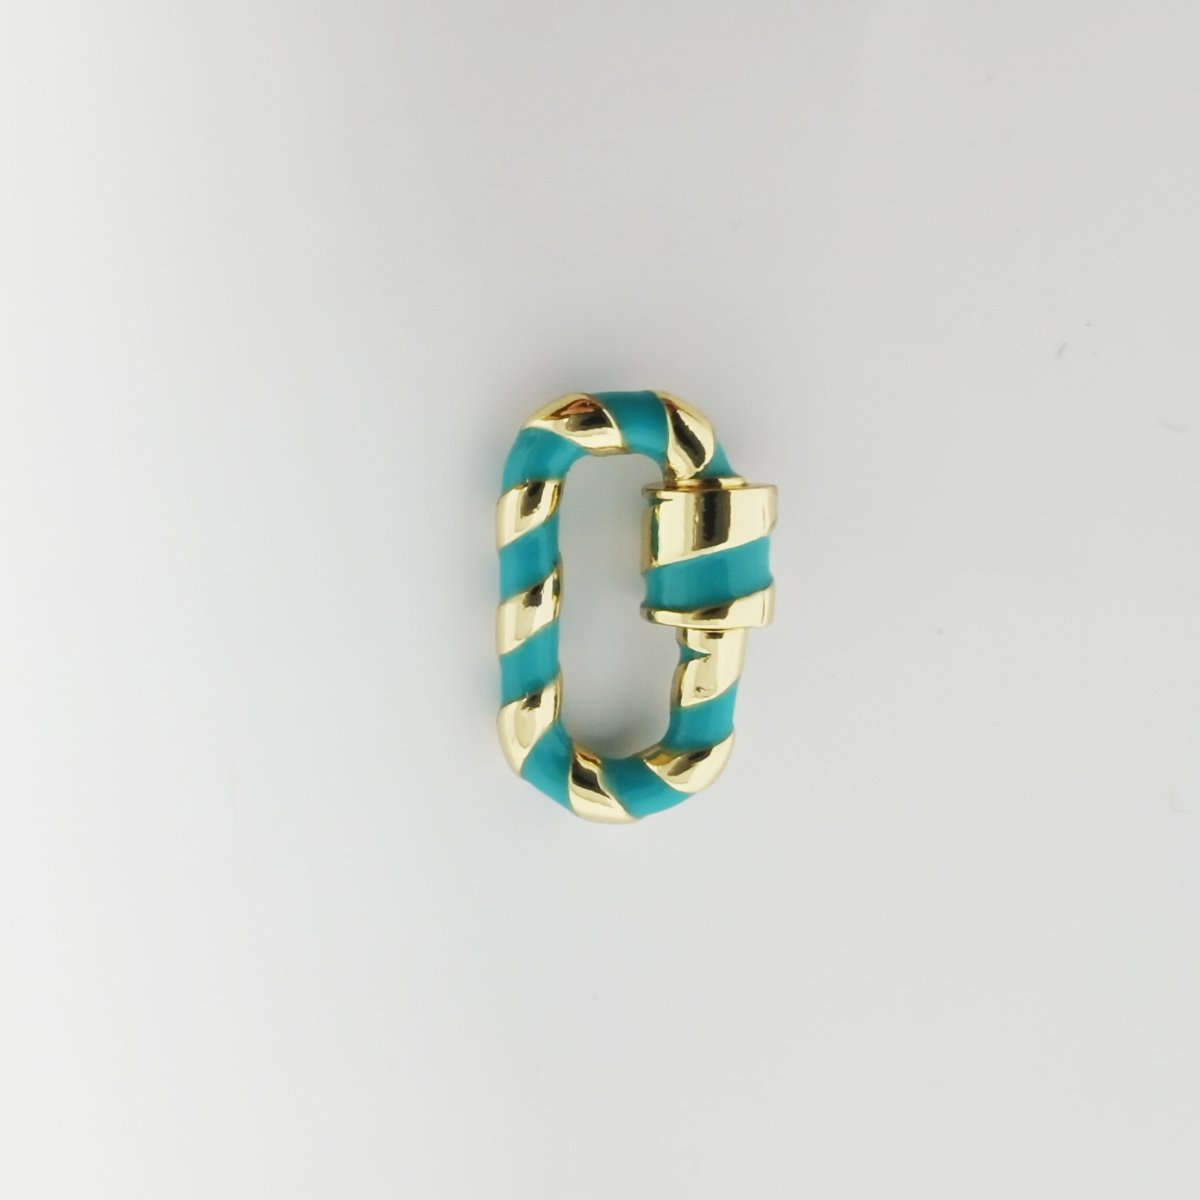 24K Gold-Plated Light Blue and Gold Paperclip Carabiner, Candy Cane Swirl Design, Circle Screw Clasp - DLUXCA